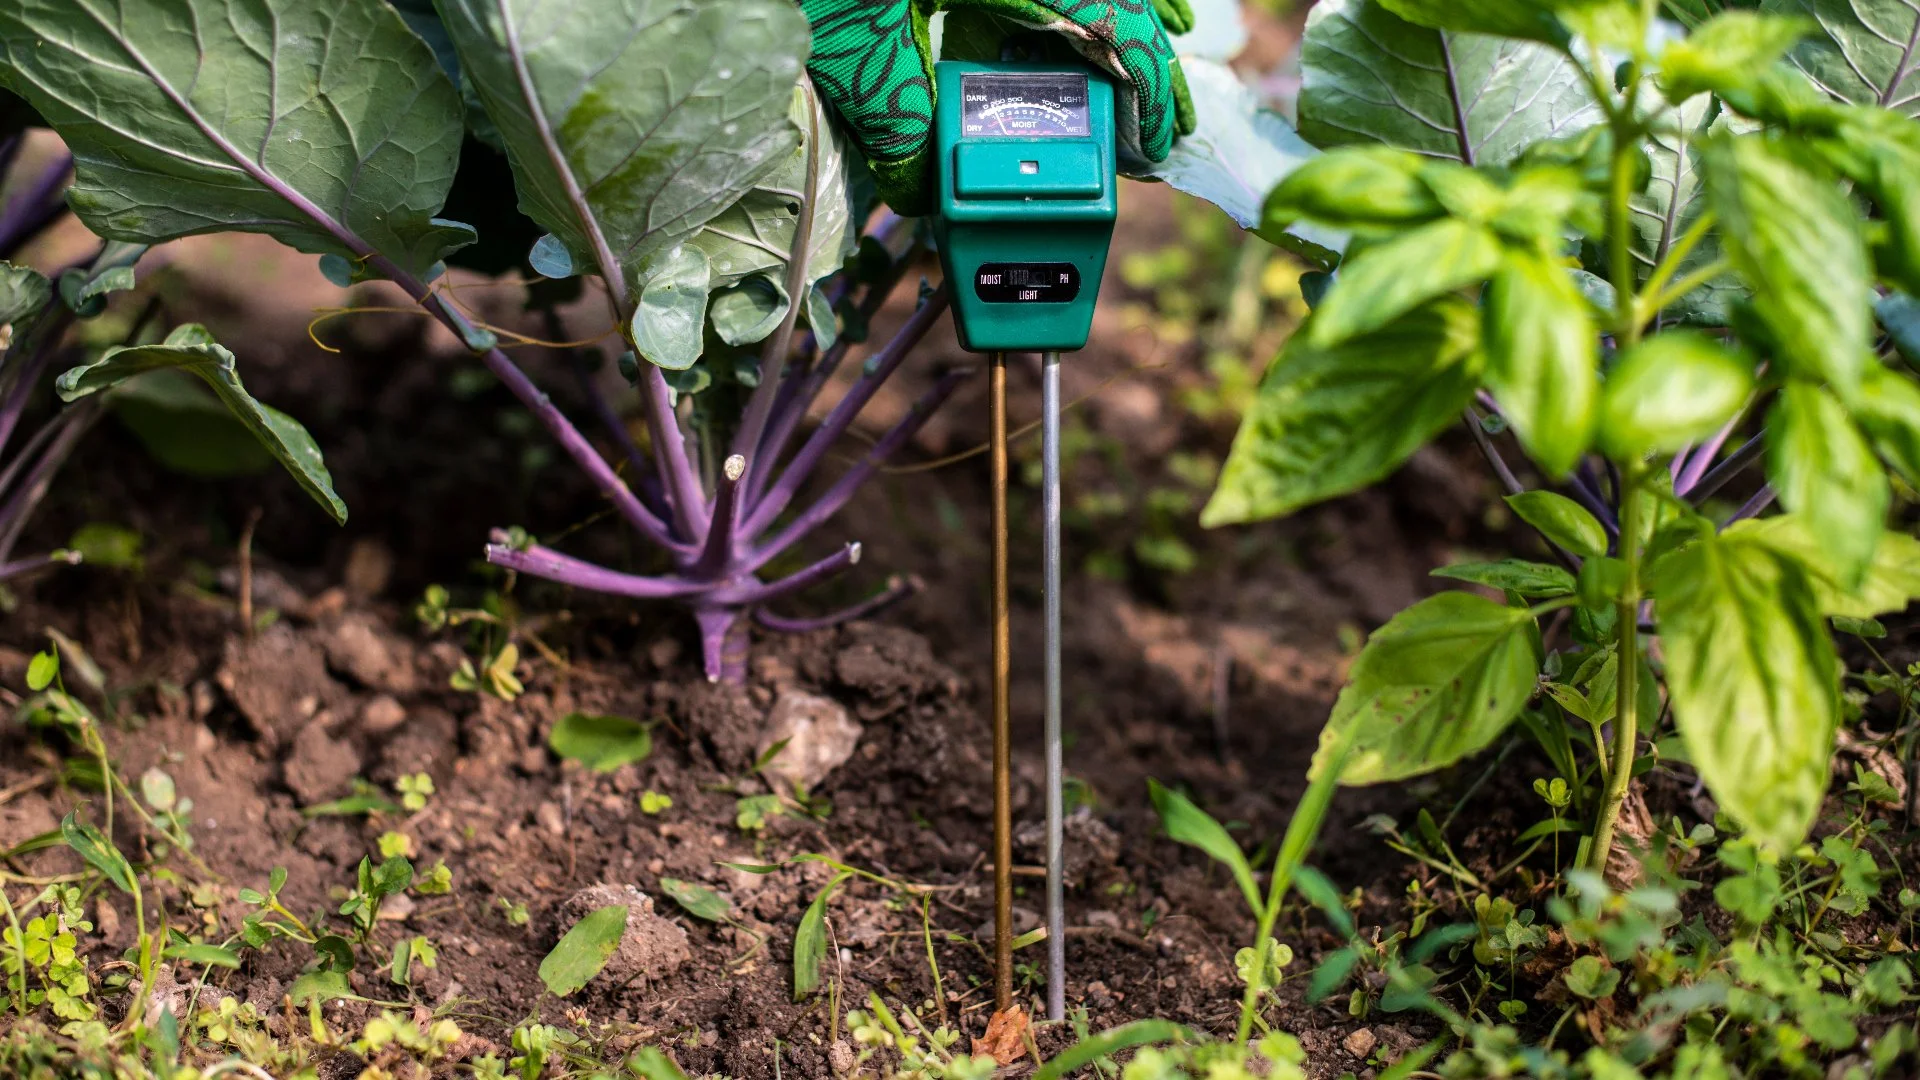 Maximize Crop Yield While Minimizing Water Usage With Soil Moisture Sensors